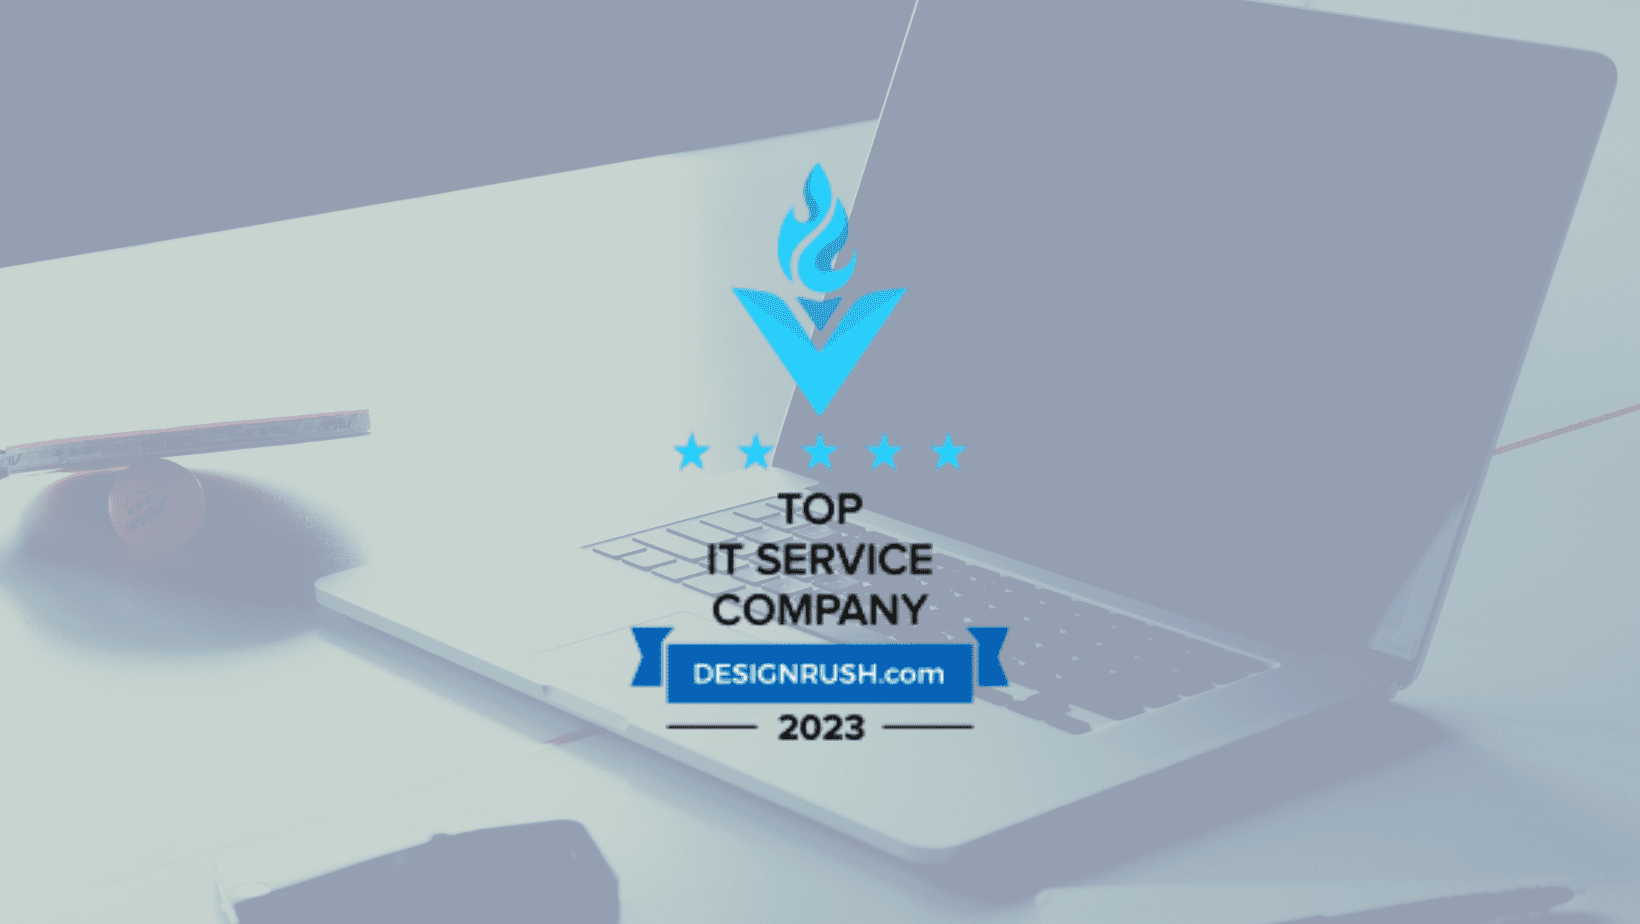 Top IT Service Company 2023 - Crow Canyon Software - it services for manufacturing companies